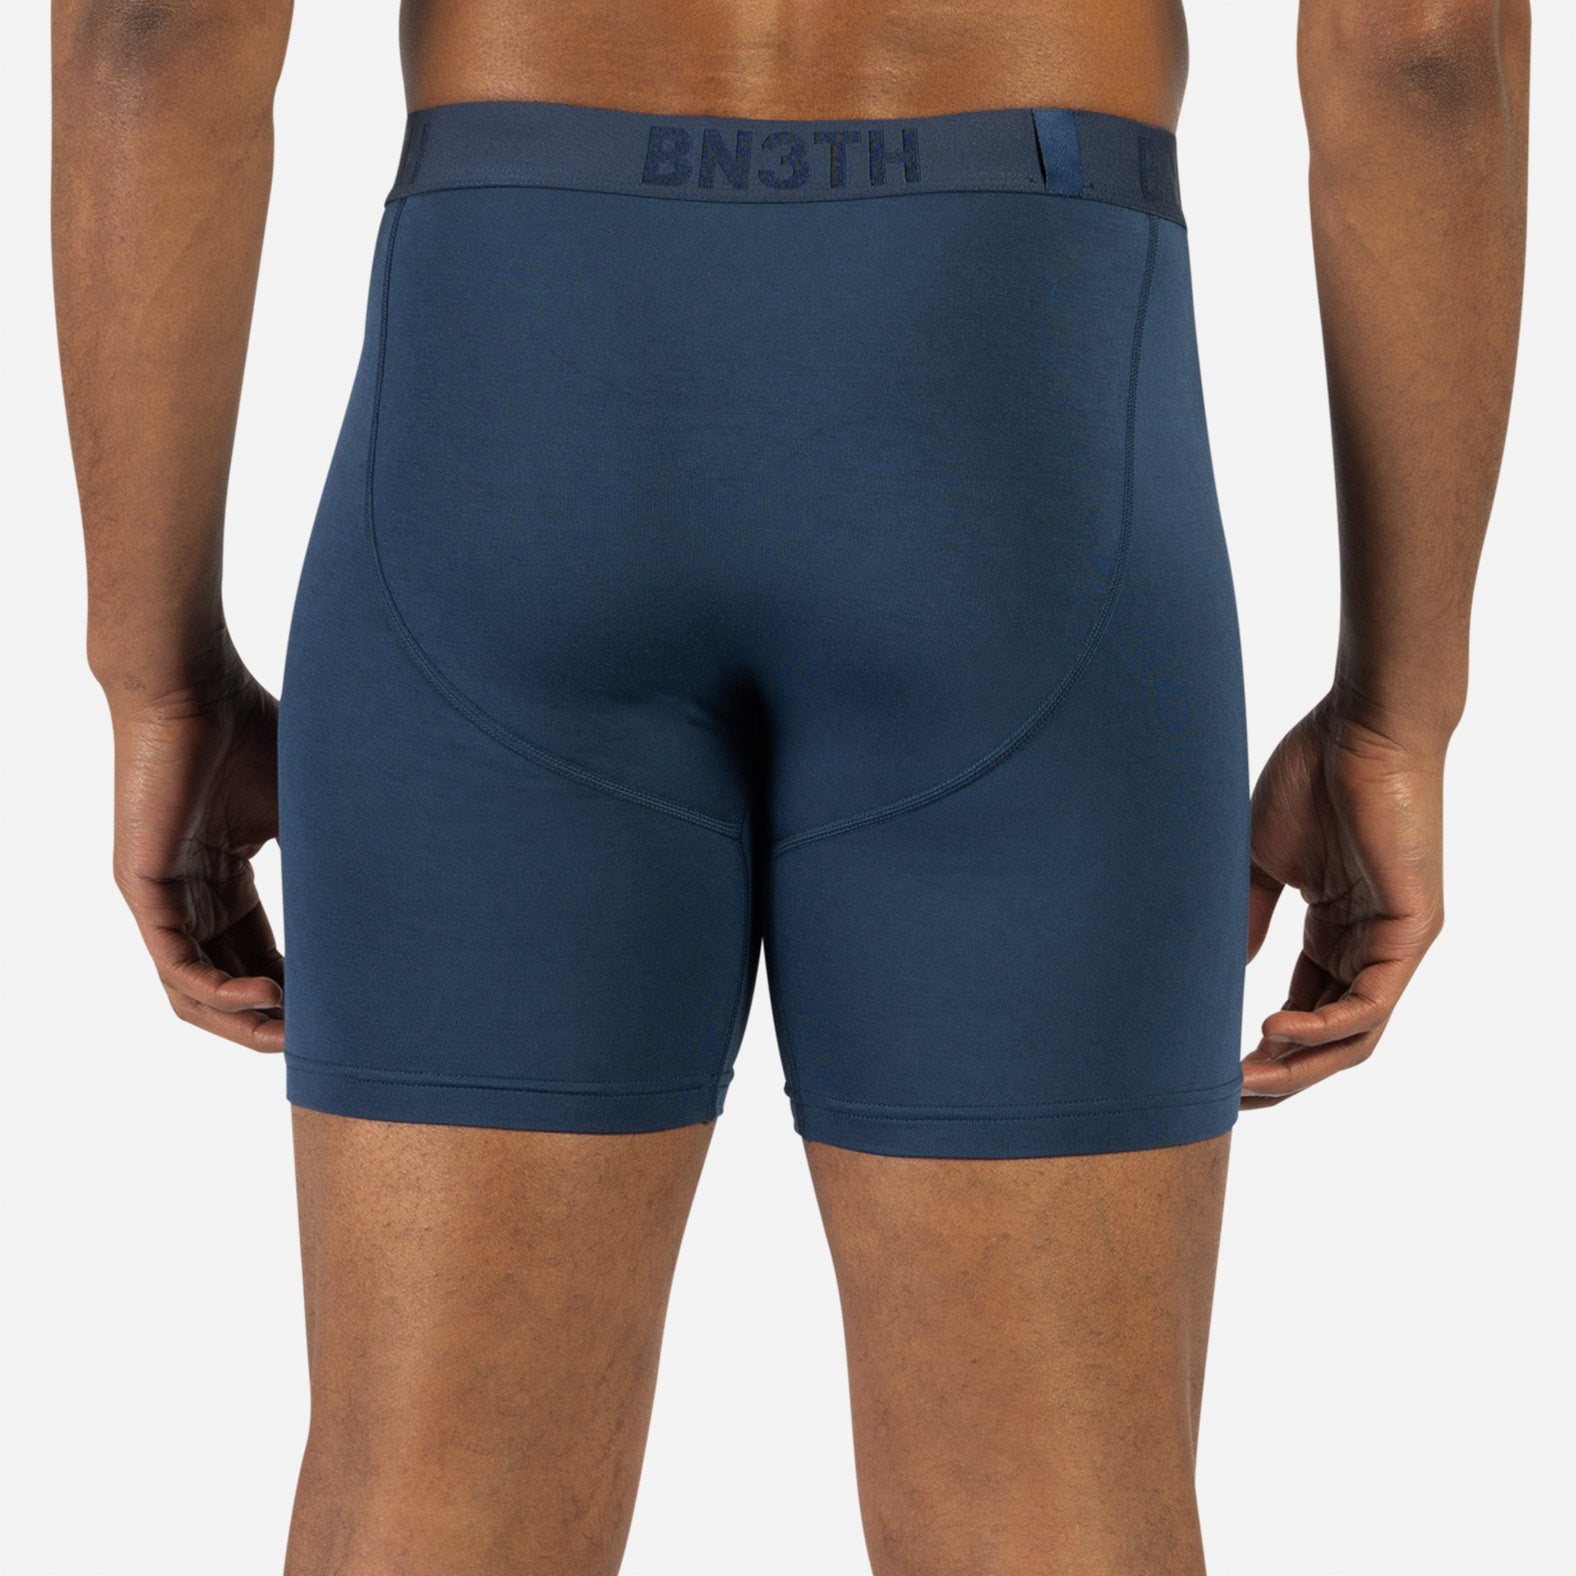 CLASSIC BOXER BRIEF: NAVY 4 PACK